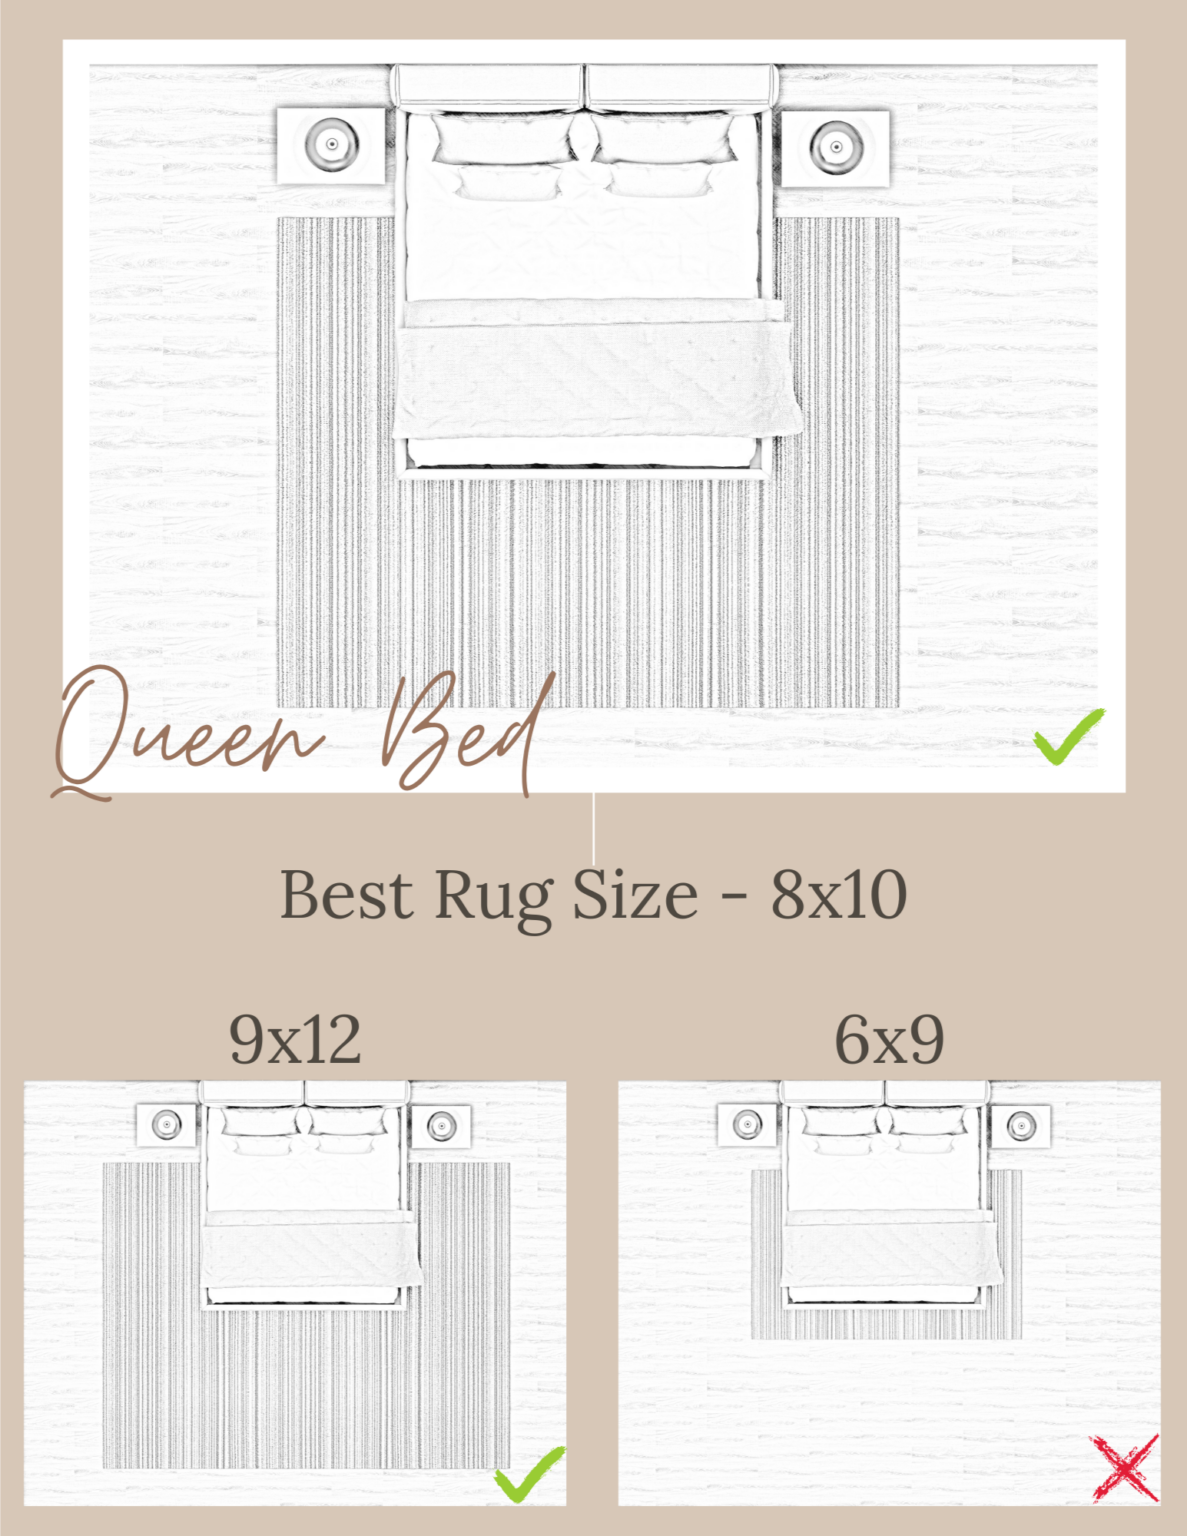 What's the Best Rug Size for a Queen Bed? - Making Joy and Pretty Things